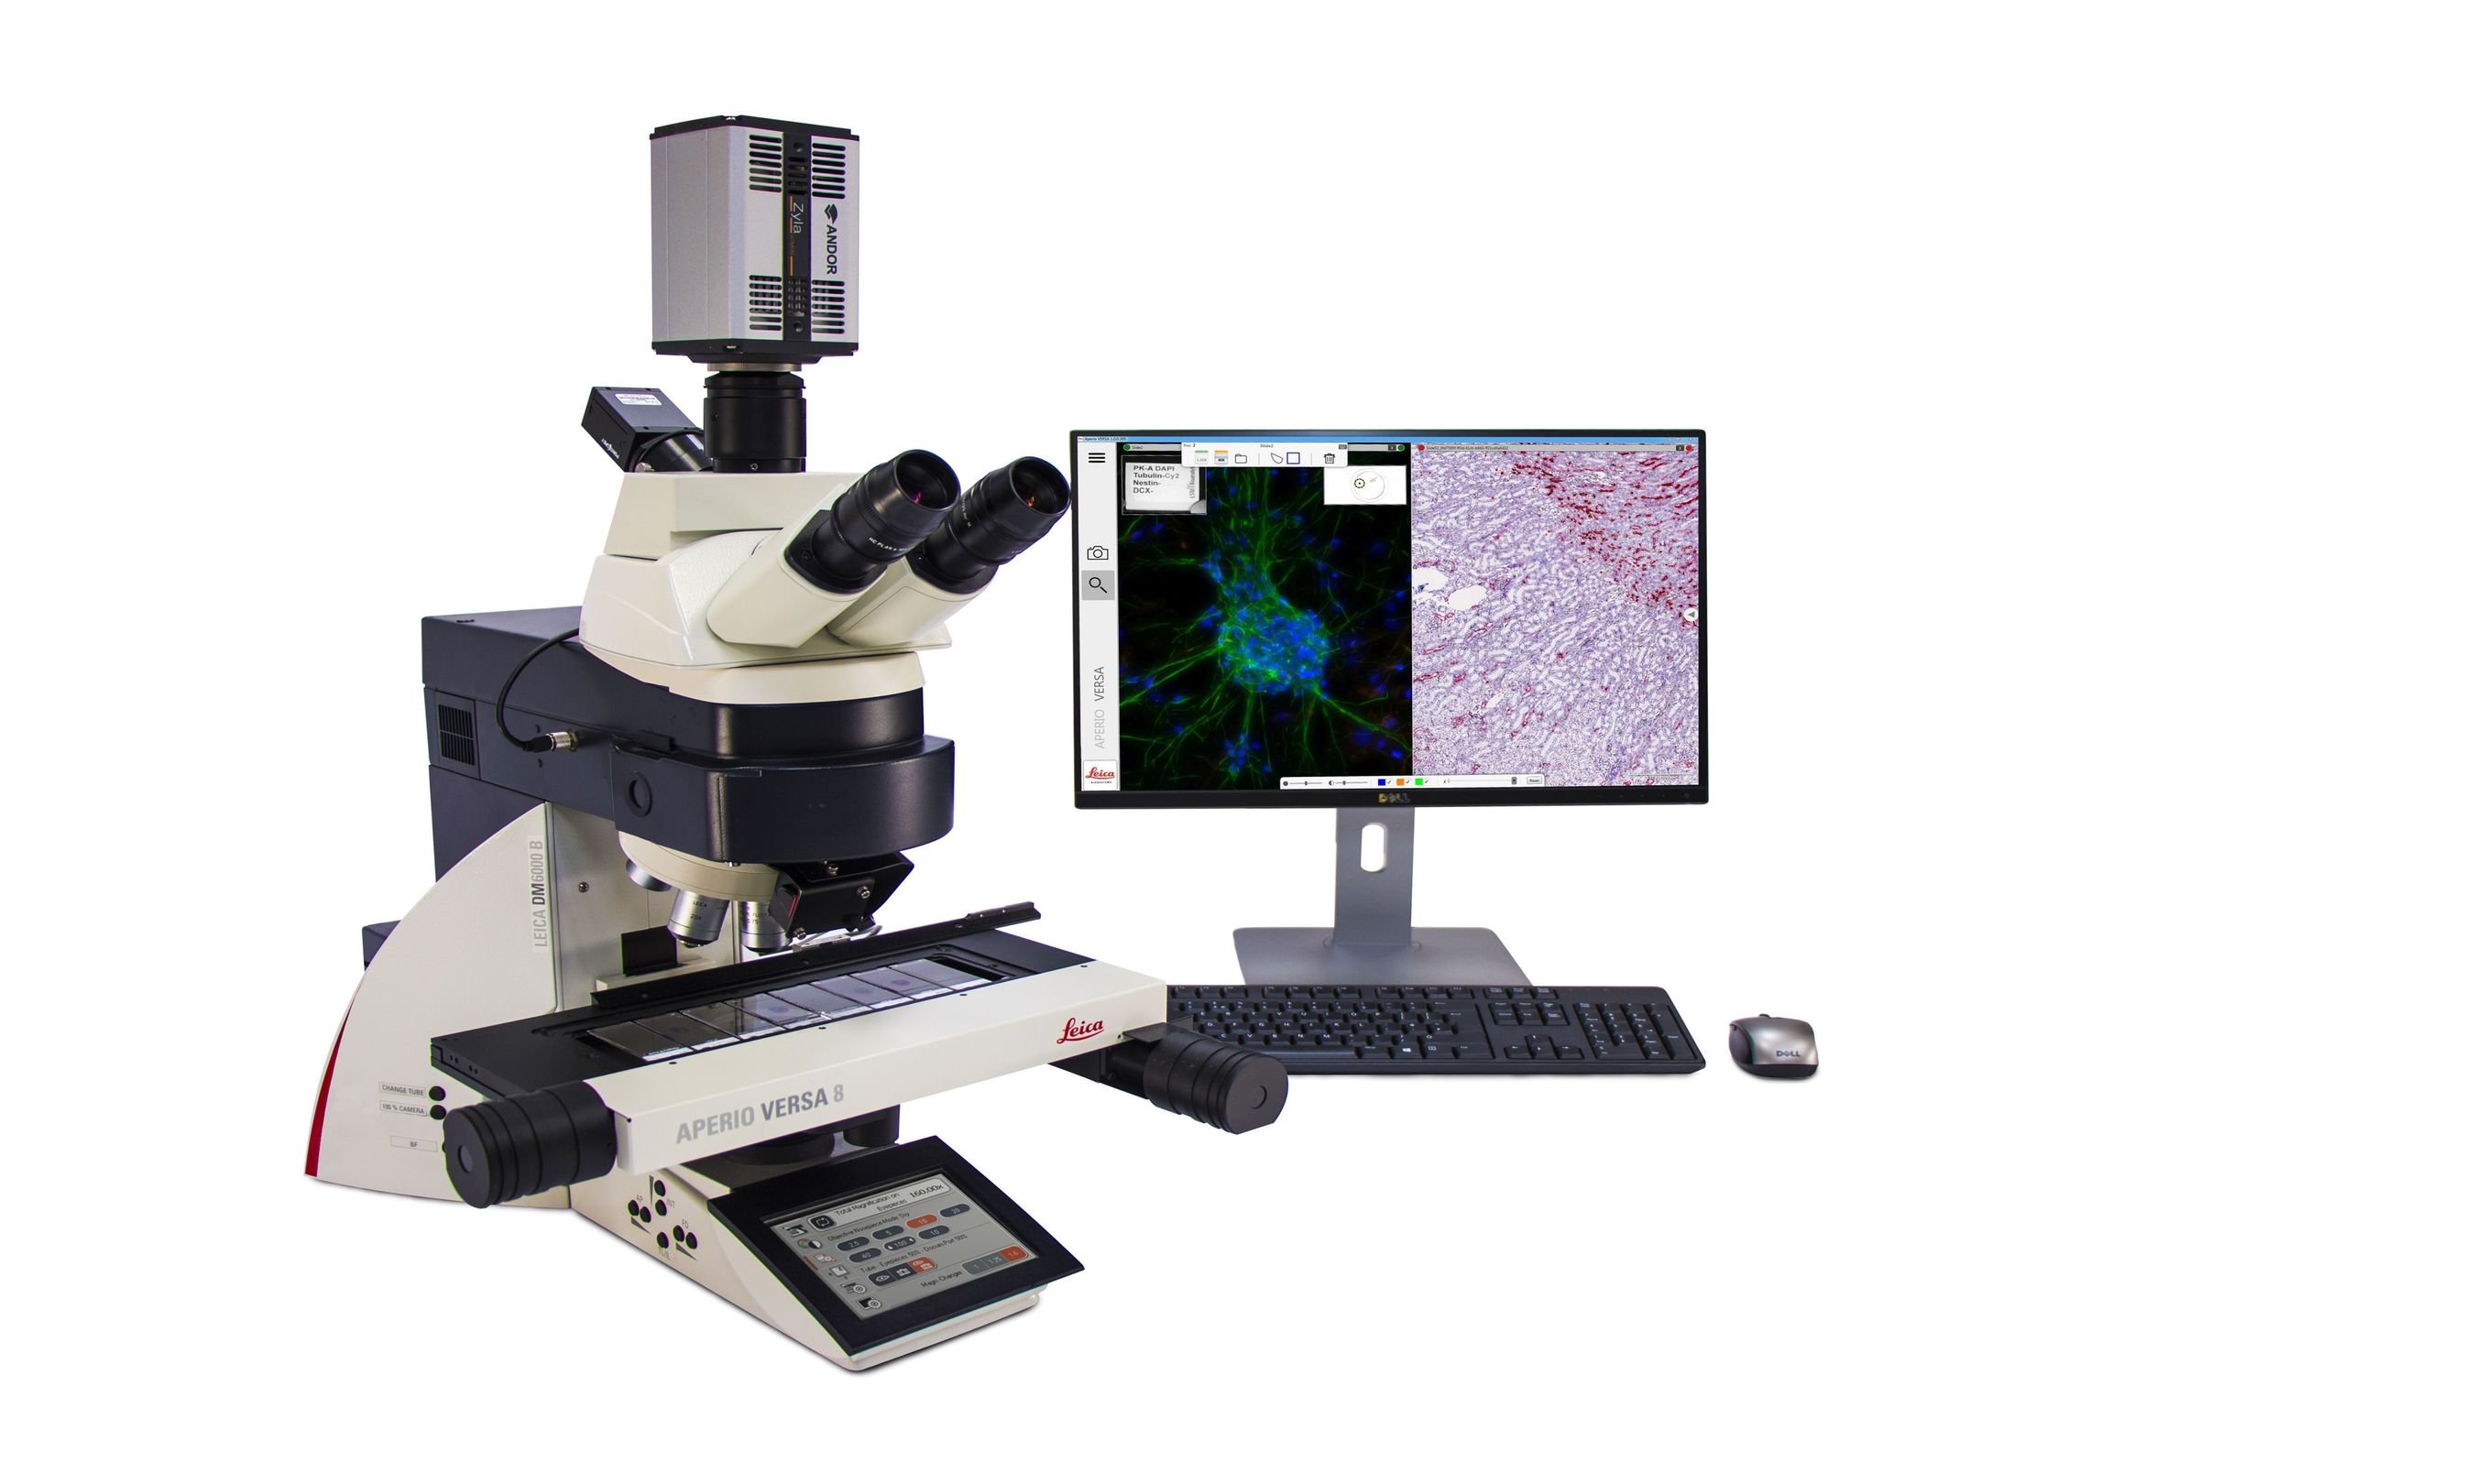 Leica Biosystems announces the introduction of the Aperio VERSA, a combination digital pathology research scanner for brightfield, fluorescence and FISH imaging at the American Association for Cancer Research (AACR) annual meeting in Philadelphia, opening April 18 and running until April 22, 2015. (PRNewsFoto/Leica Biosystems)